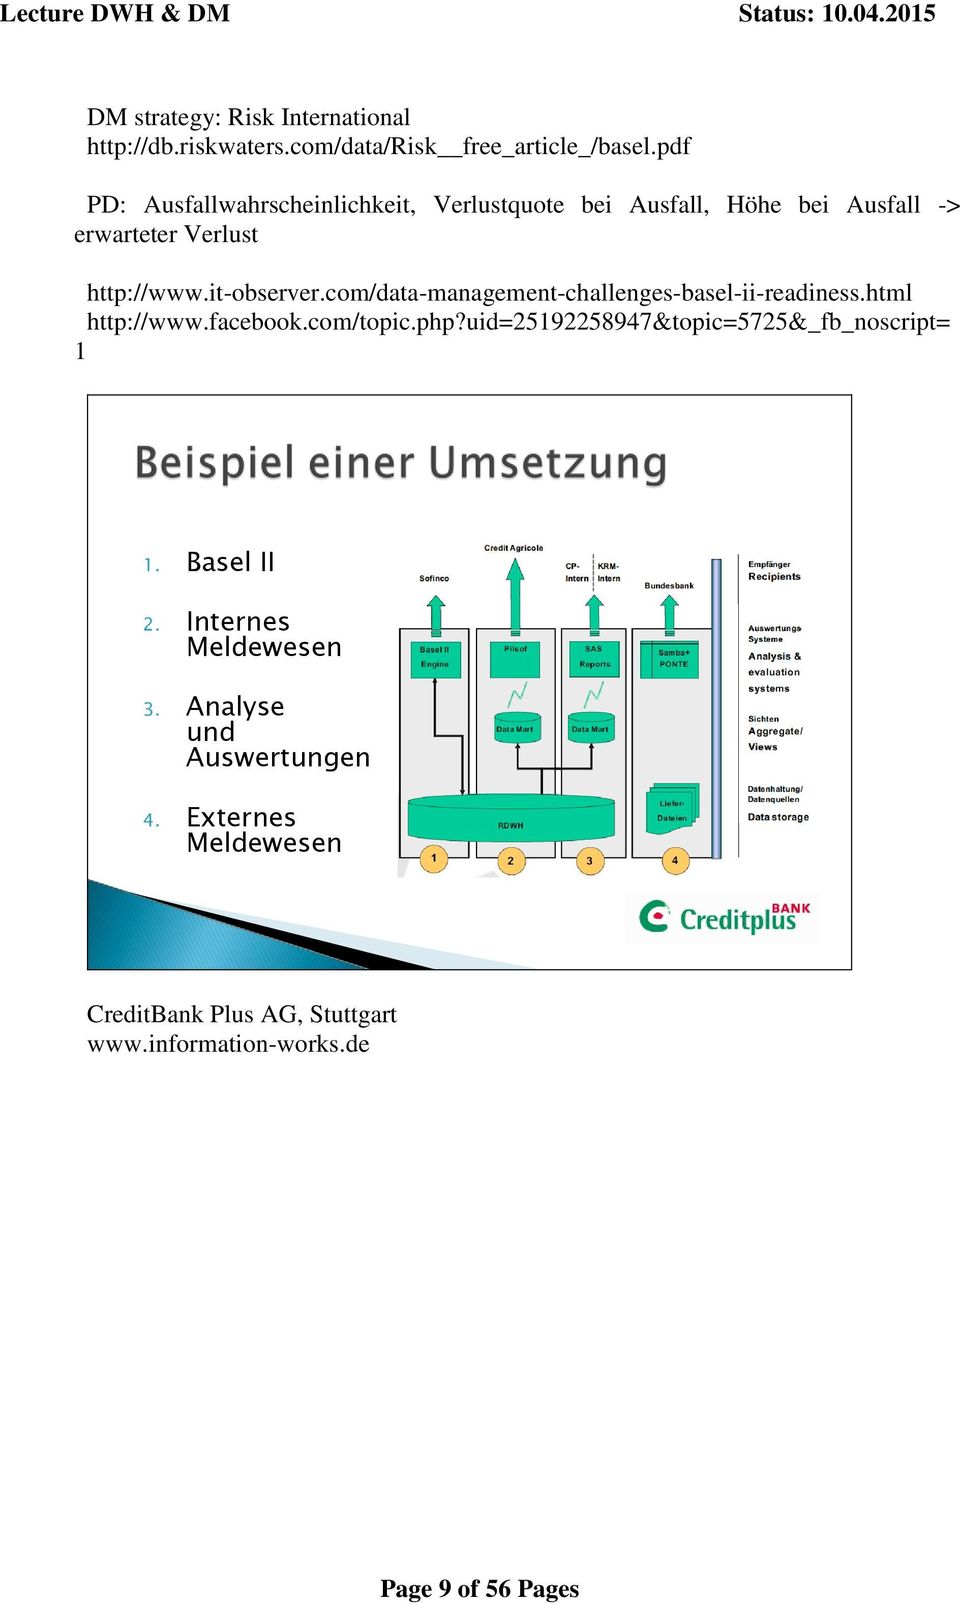 com/data-management-challenges-basel-ii-readiness.html http://www.facebook.com/topic.php?